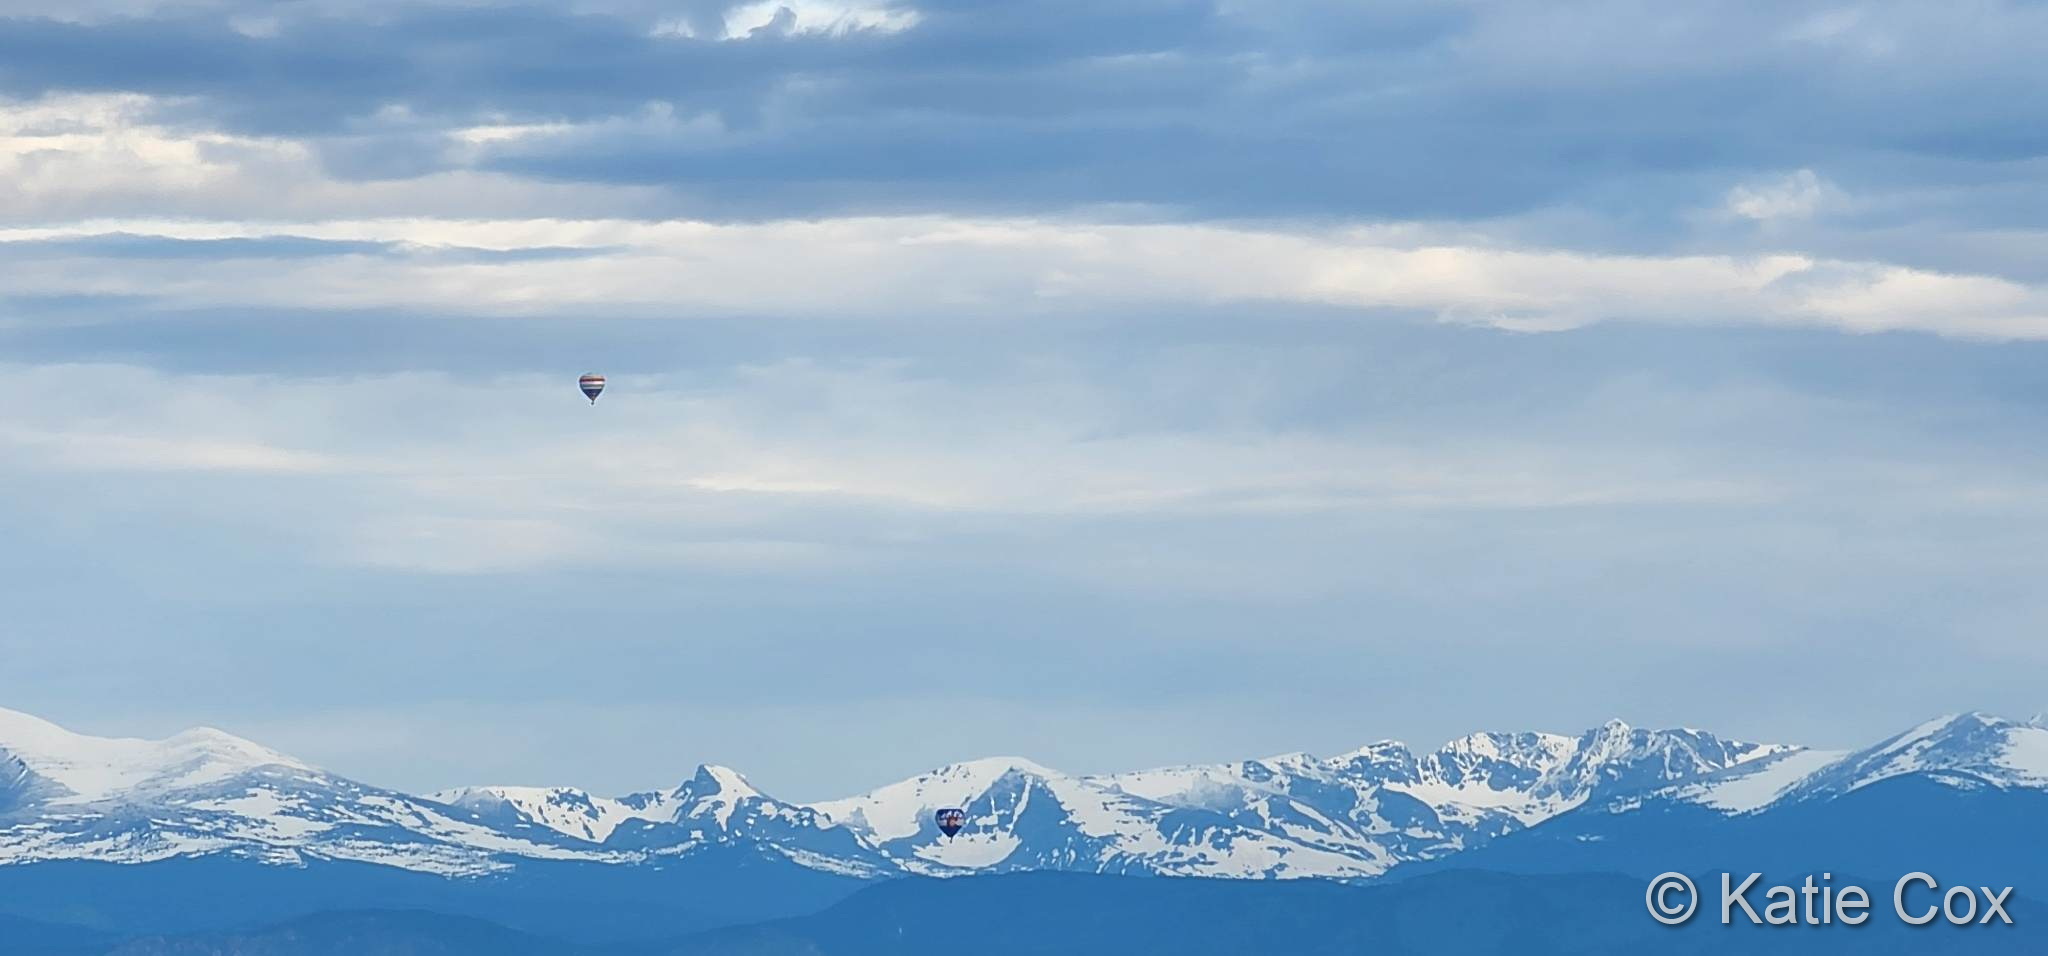 Hot air balloons take flight in front of the Rocky Mountains. (Katie Cox)